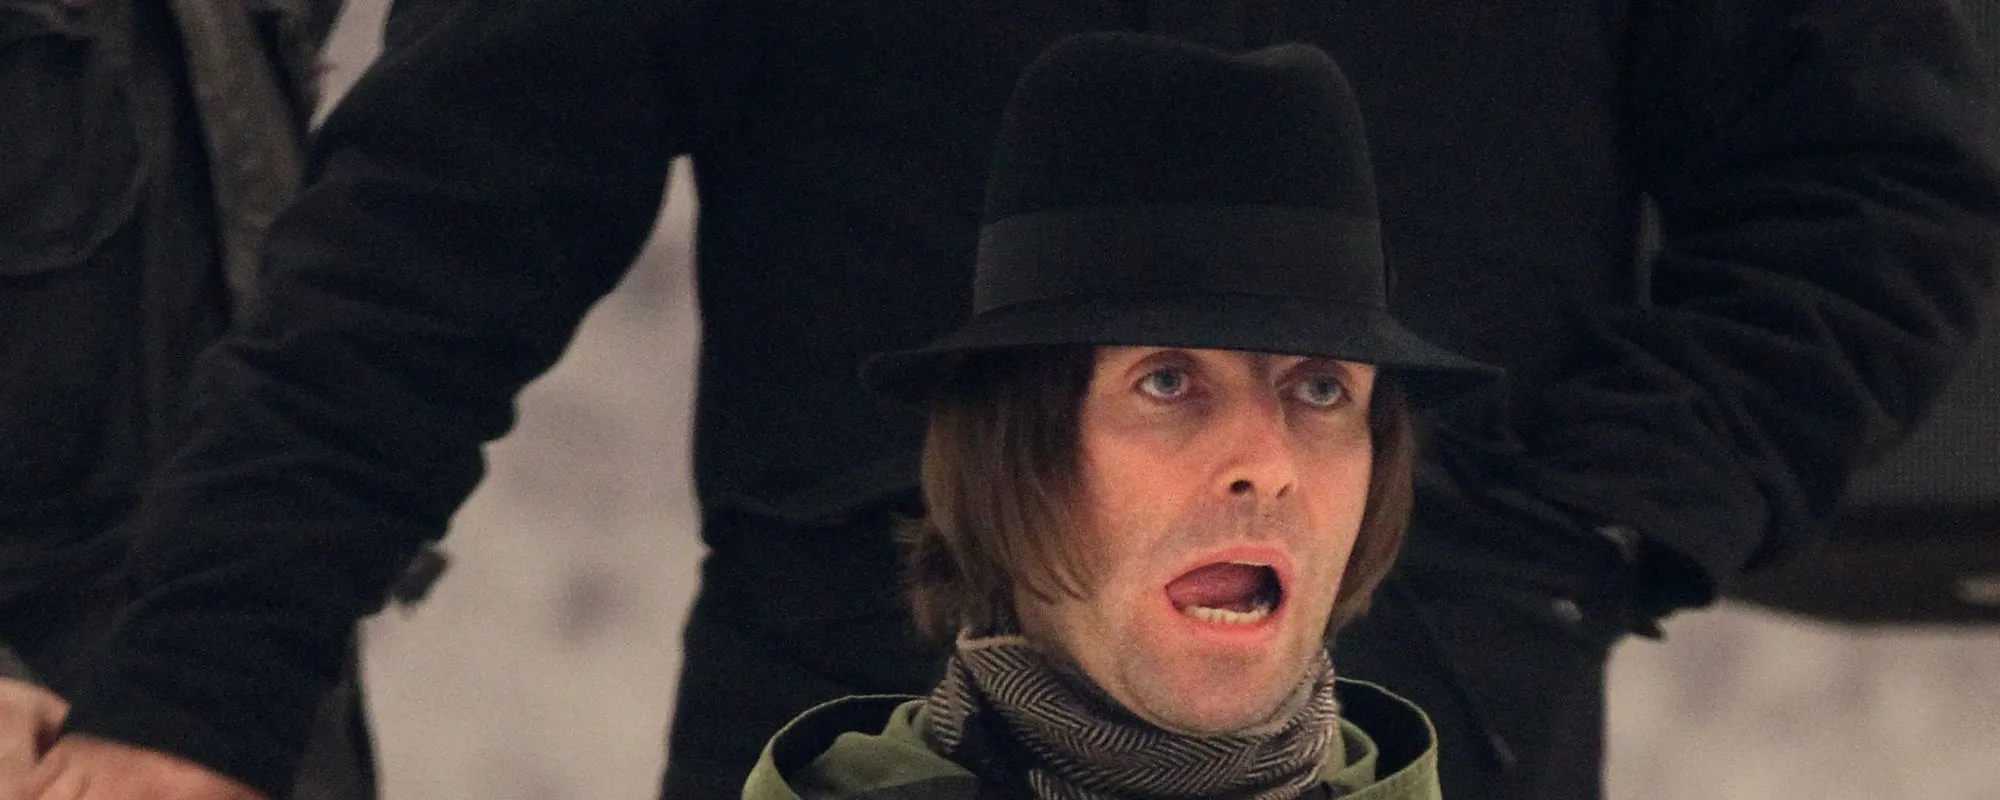 “It’s Over”: Liam Gallagher Shoots Down Oasis Reunion